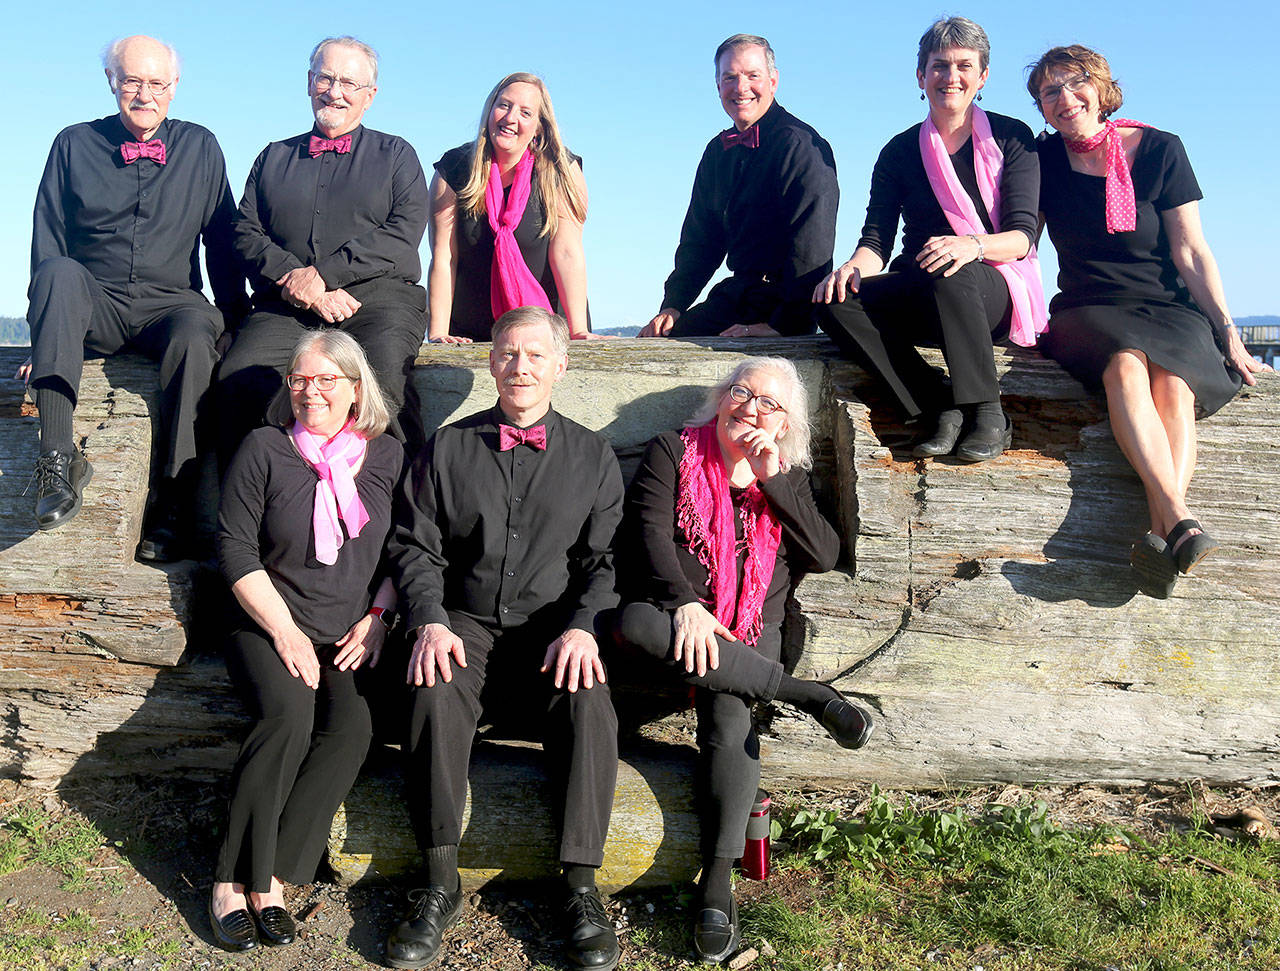 The Wild Rose Chorale is readying for a cappella concerts tonight and Saturday, June 8. Personnel includes, clockwise, from top left, Doug Rodgers, Al Thompson, Sarah Gustner-Hewitt, Steve Duniho, Leslie Lewis, JES Schumacher, Marj Iuro, Charles Helman and Lynn Nowak. (Barney Burke)